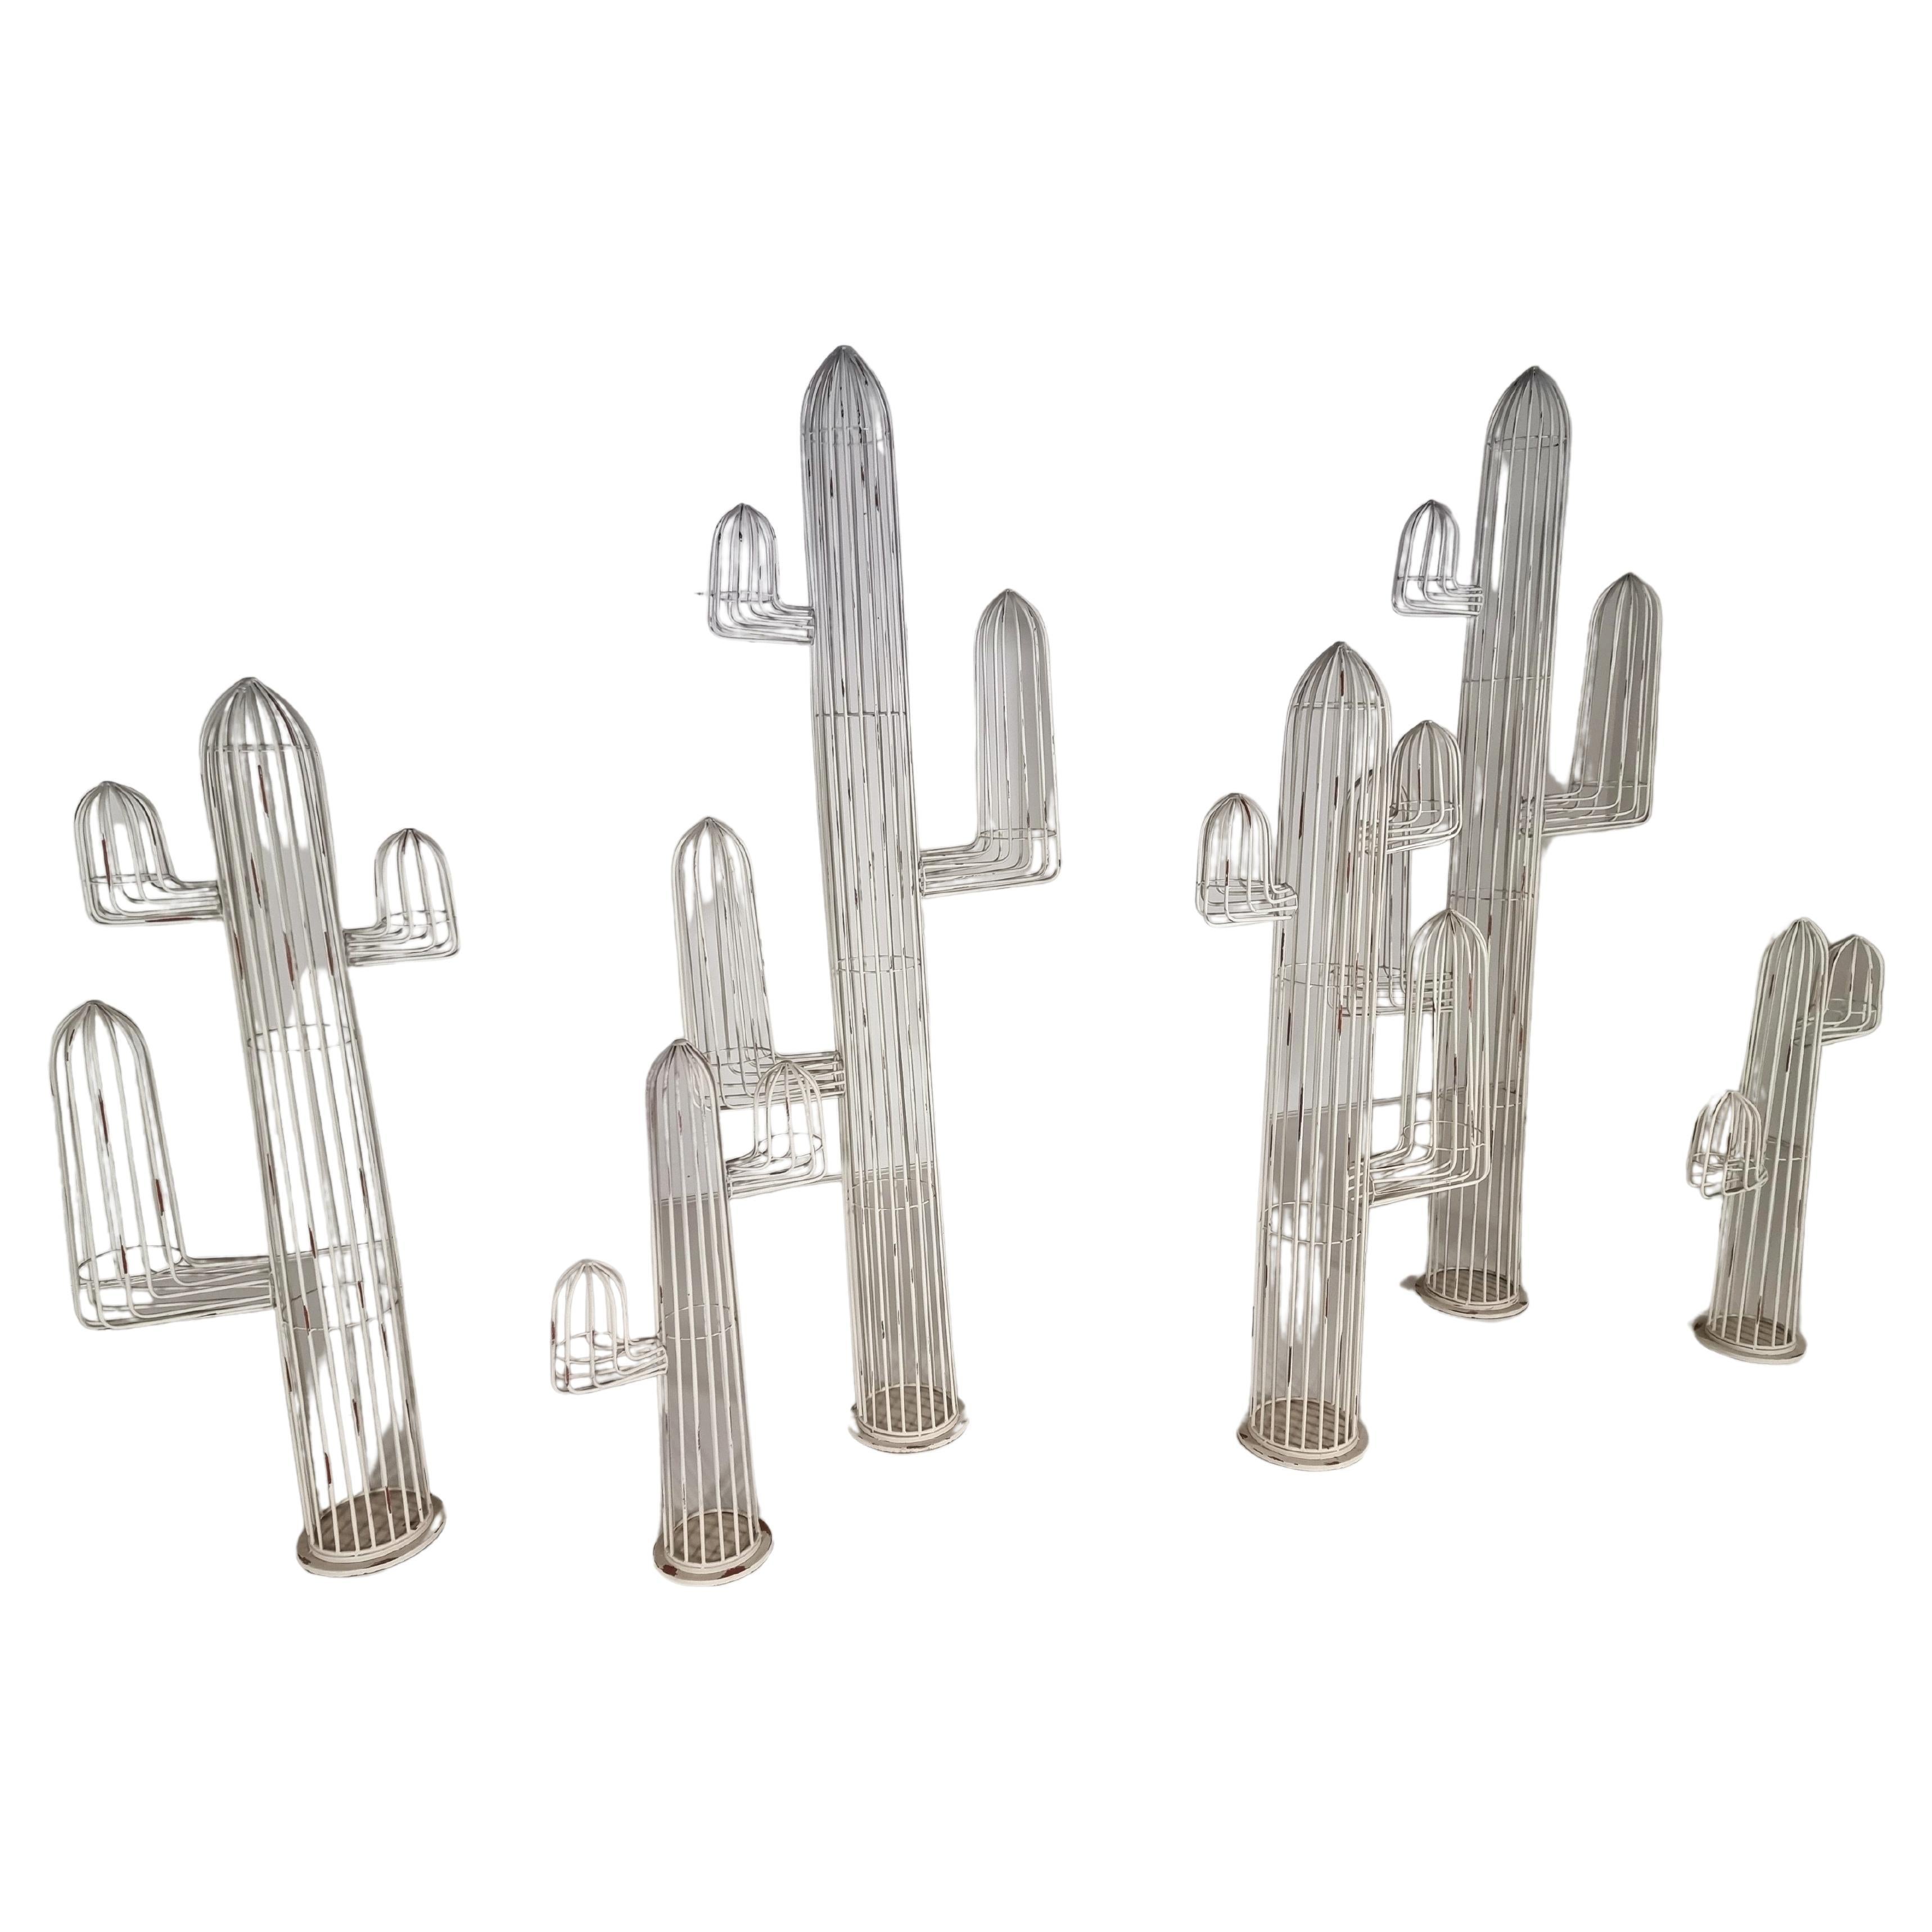 Set of 6 life-size decorative metal Cactus Sculptures. The sculptures were designed in the 1980s by a Belgium artist for a garden architectural firm.

One of a kind set that will look fantastic both indoors and outdoors

Sizes: 
240x90x30